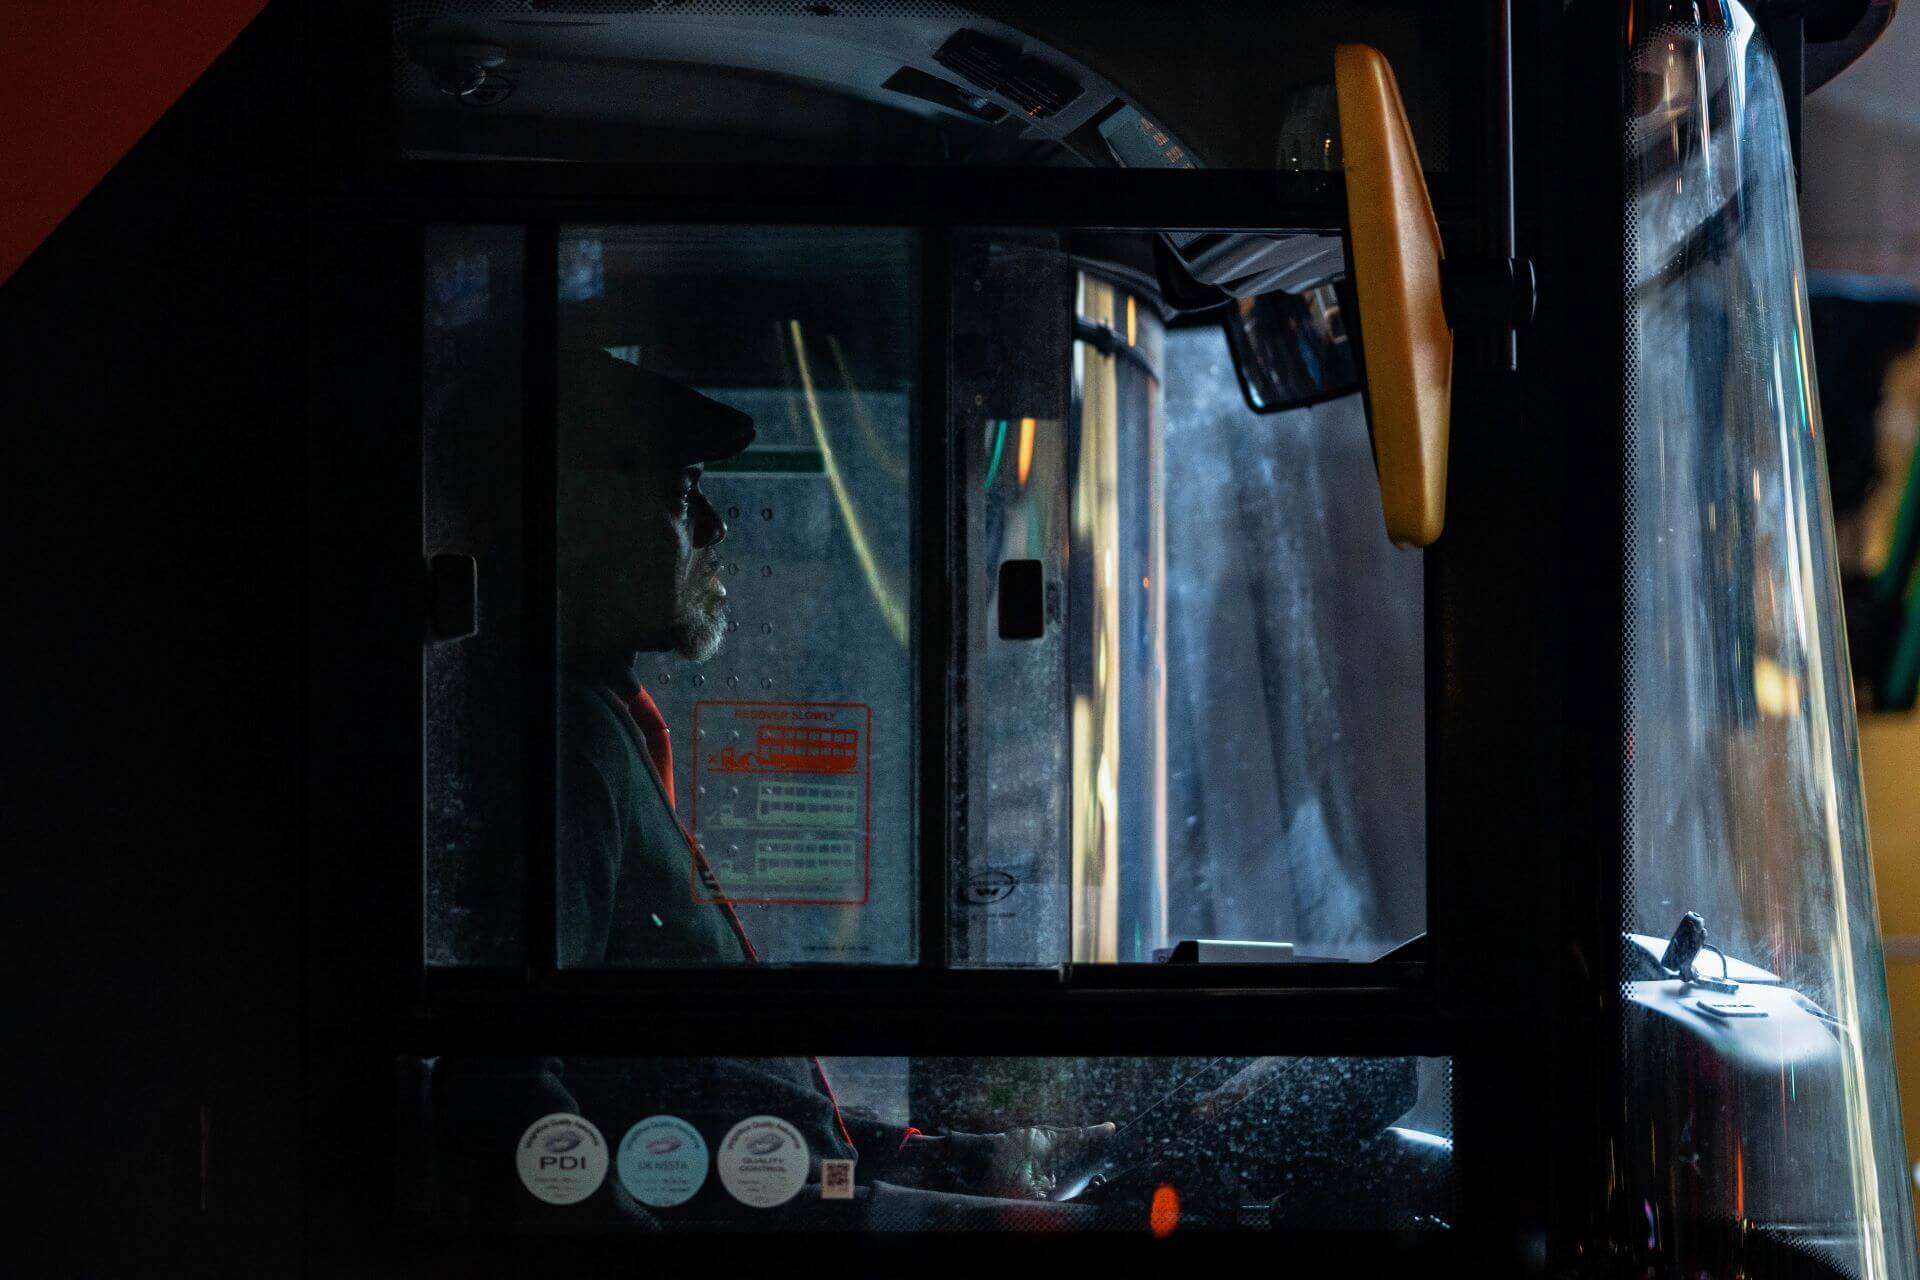 Does Driving a Bus Increases Risk of Hearing Loss?